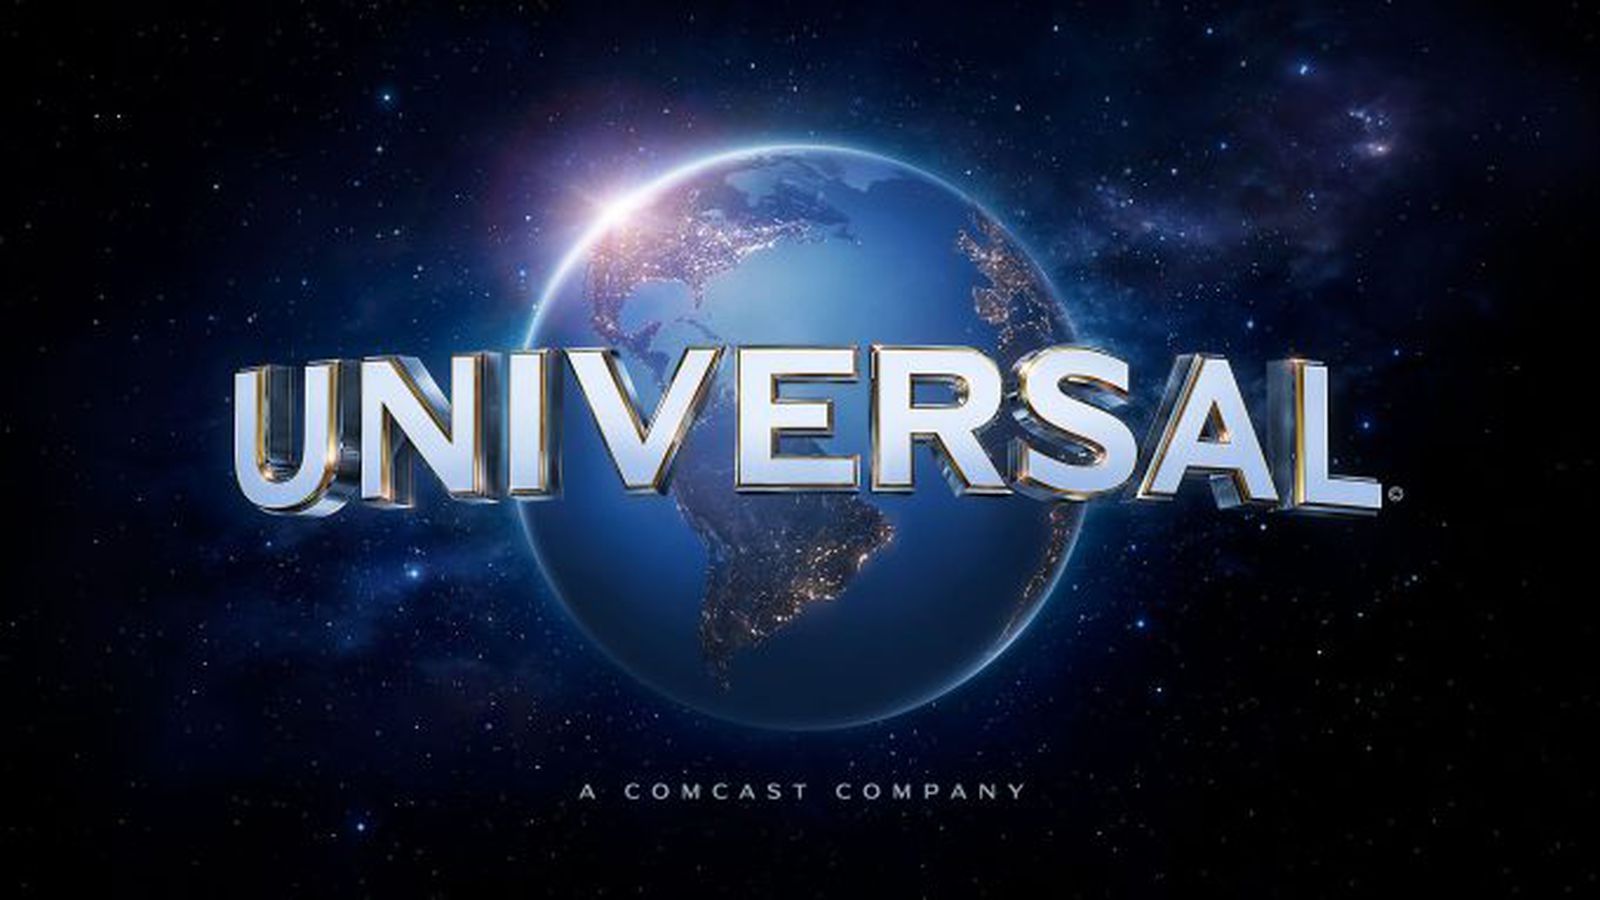 Universal to Make Theatrical Movie Releases Available as $20 Digital Rentals on Same Day